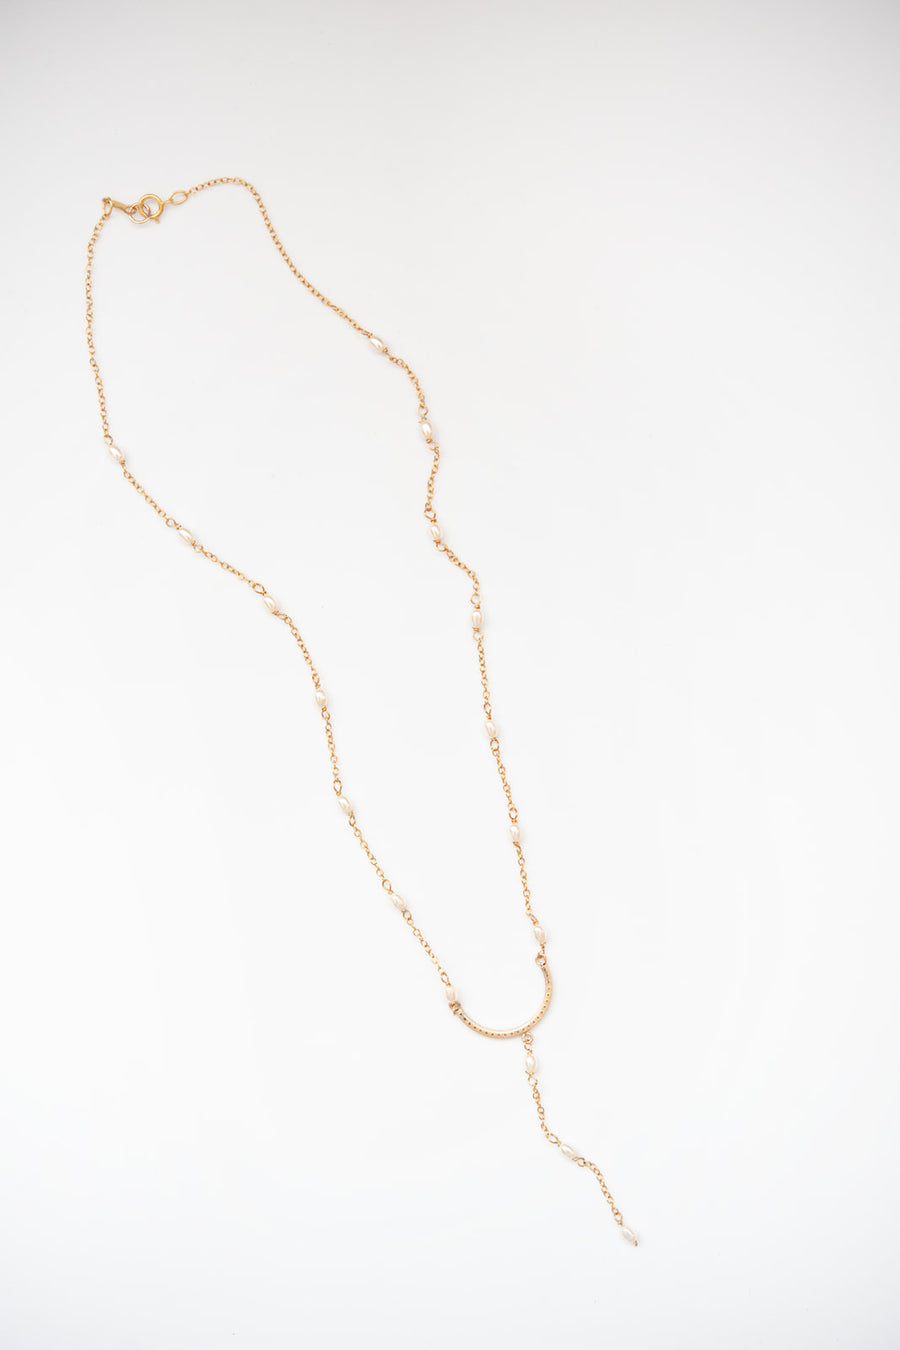 Tinsley Pearl Gold Necklace